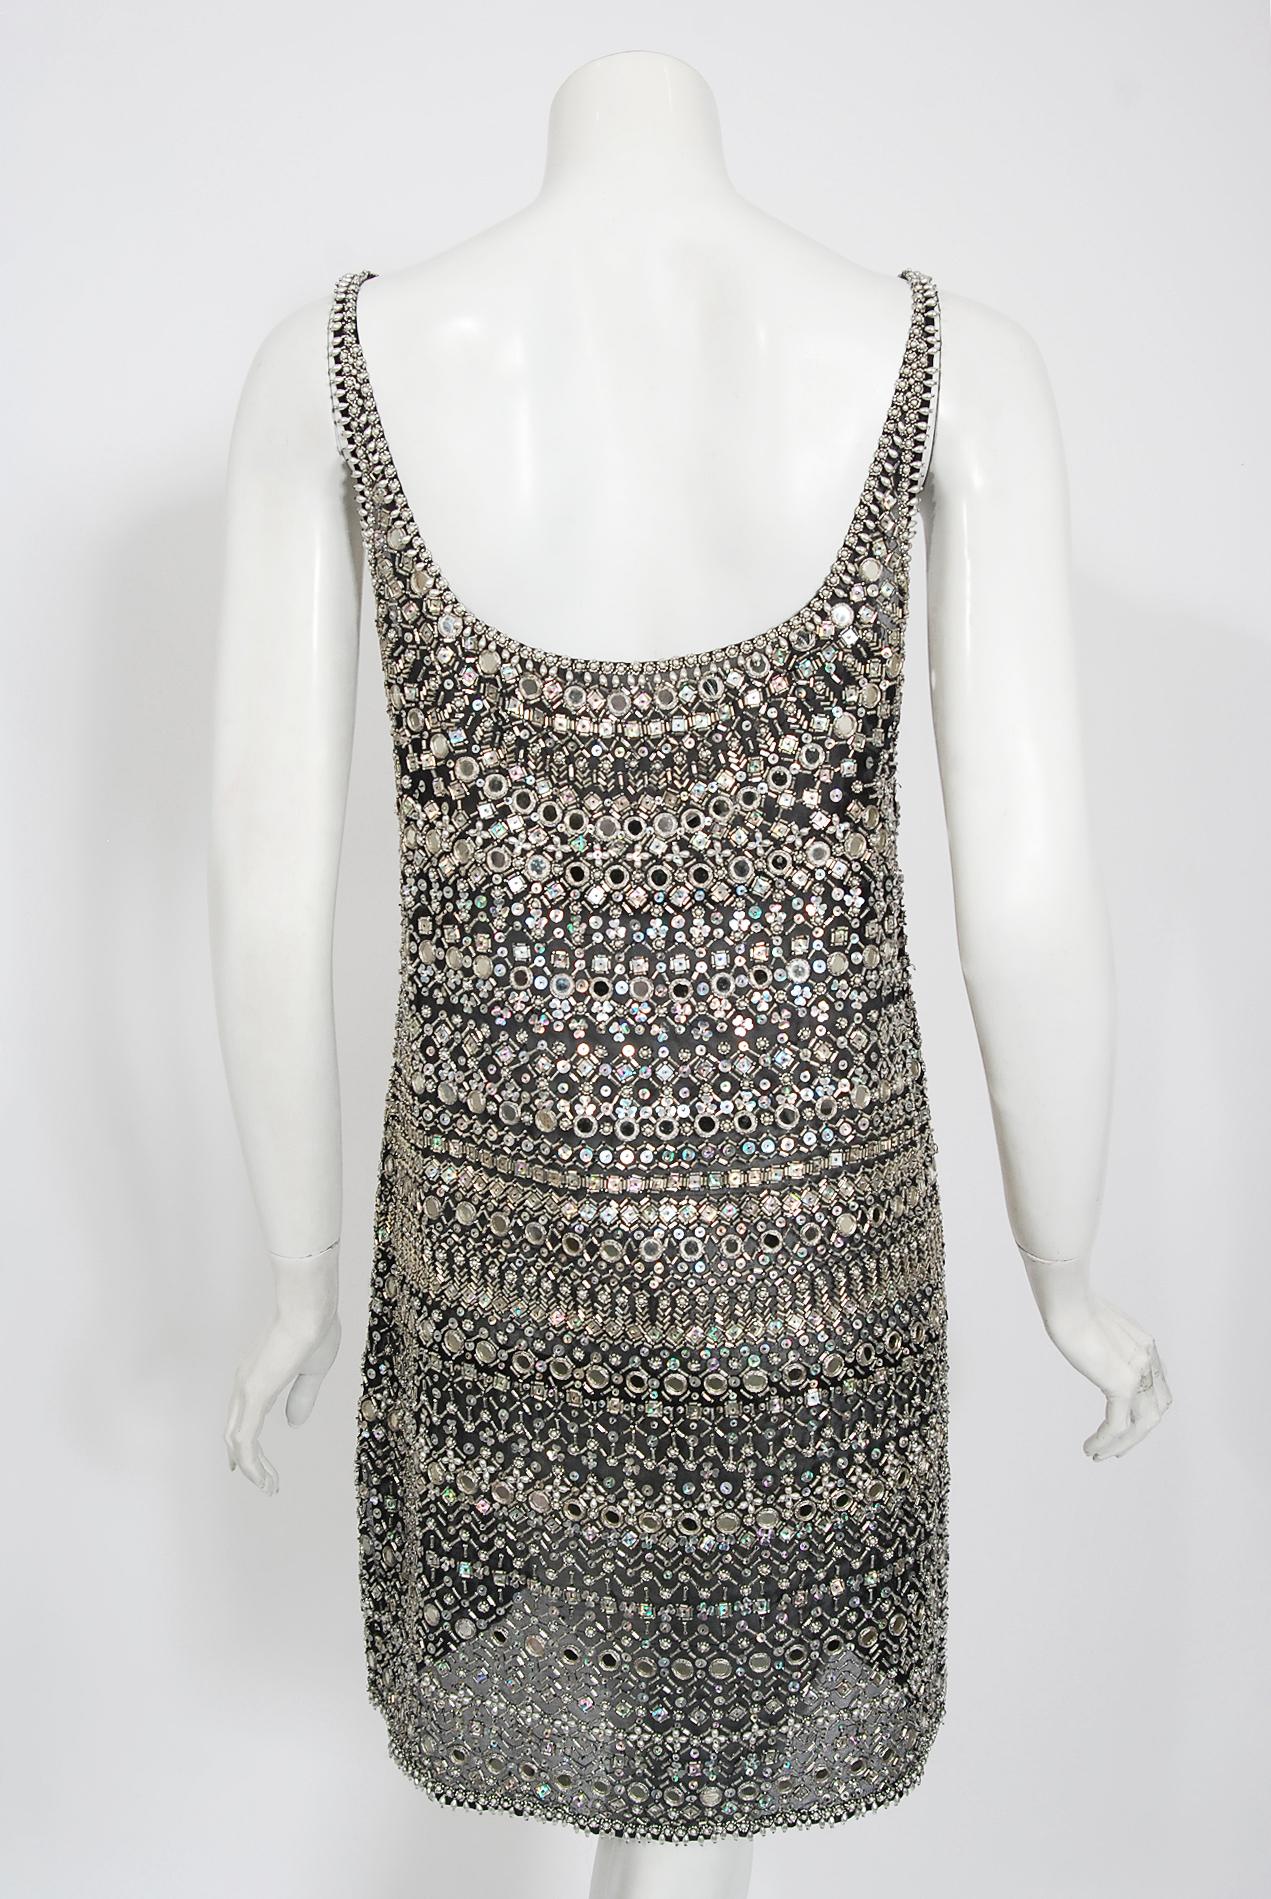 Vintage Halston Couture Beaded Mirror Mini Dress & Jacket Made For Liza Minnelli 9